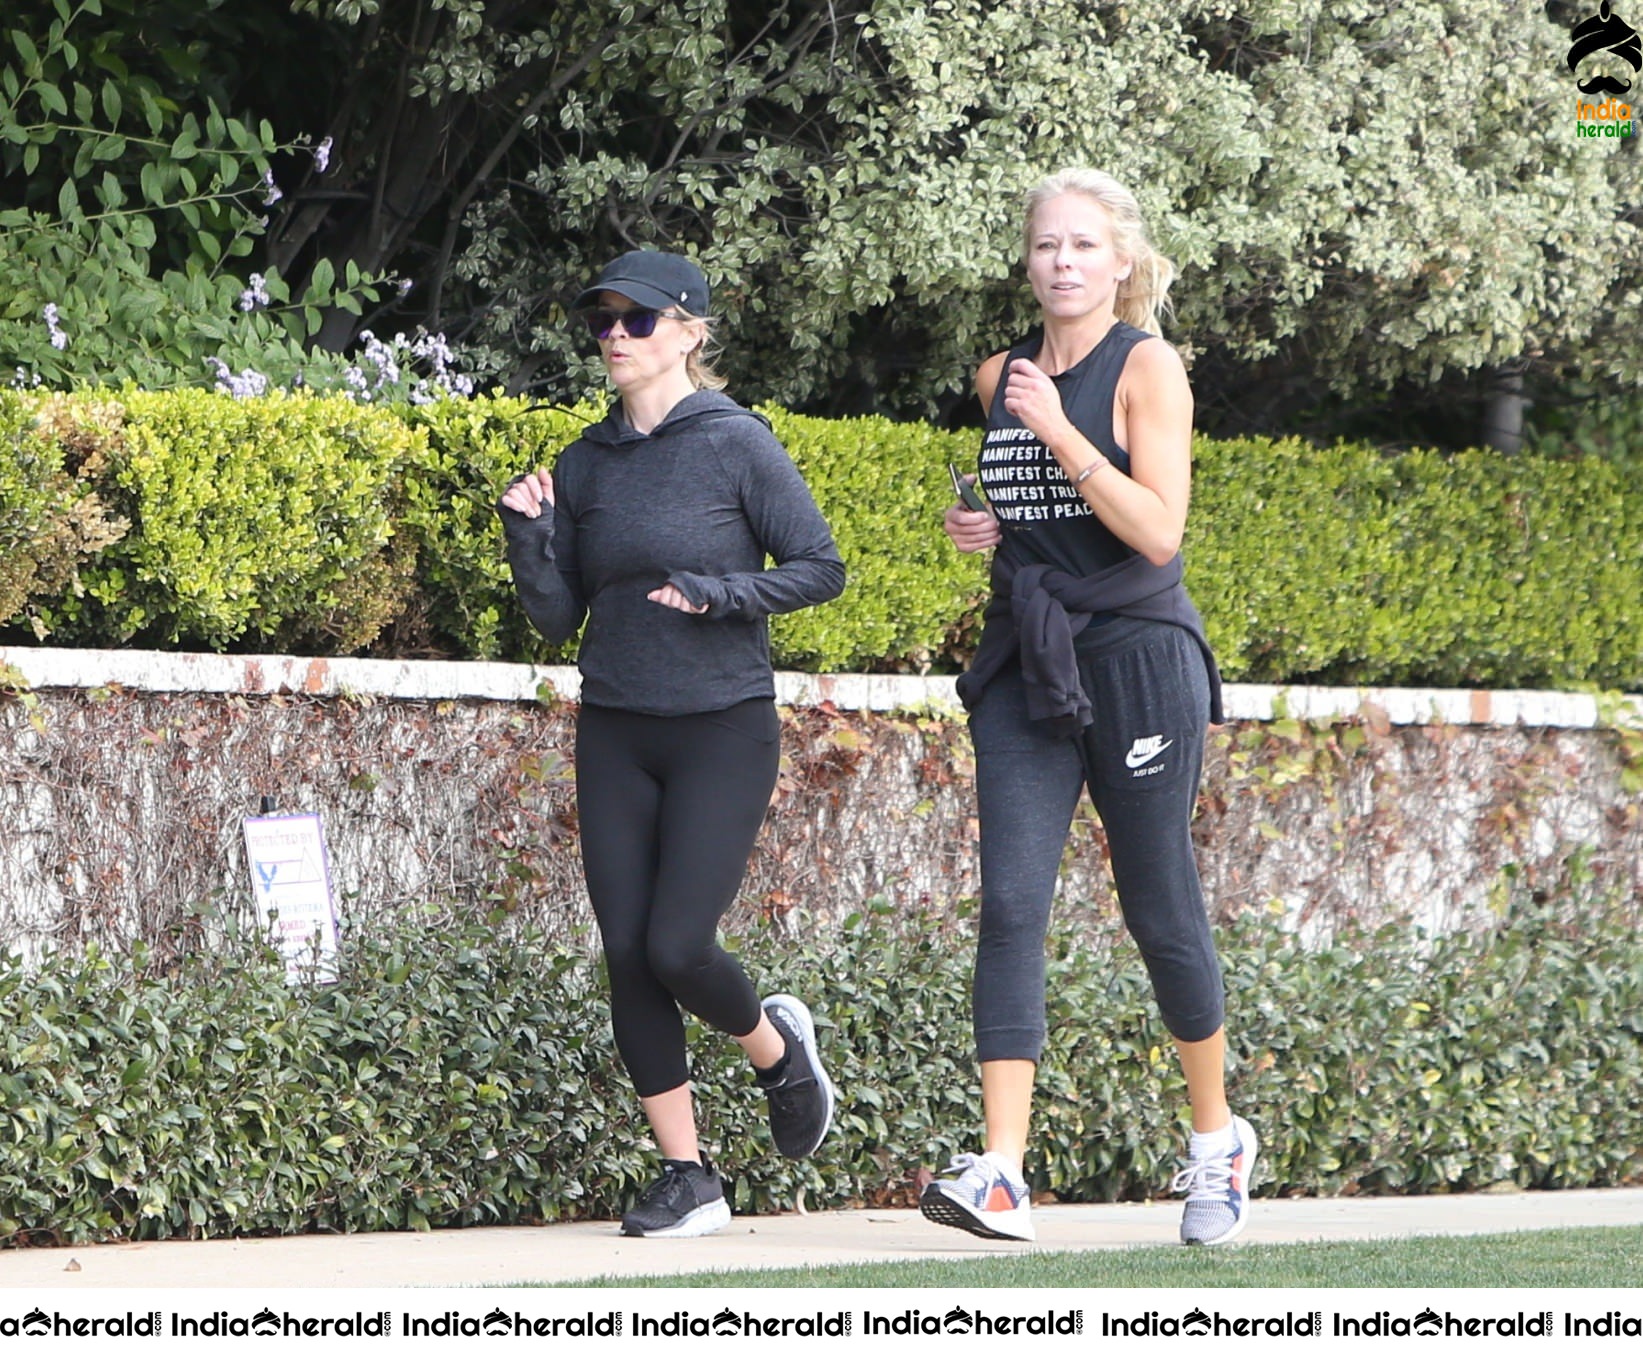 Reese Witherspoon seen jogging with a friend in Los Angeles